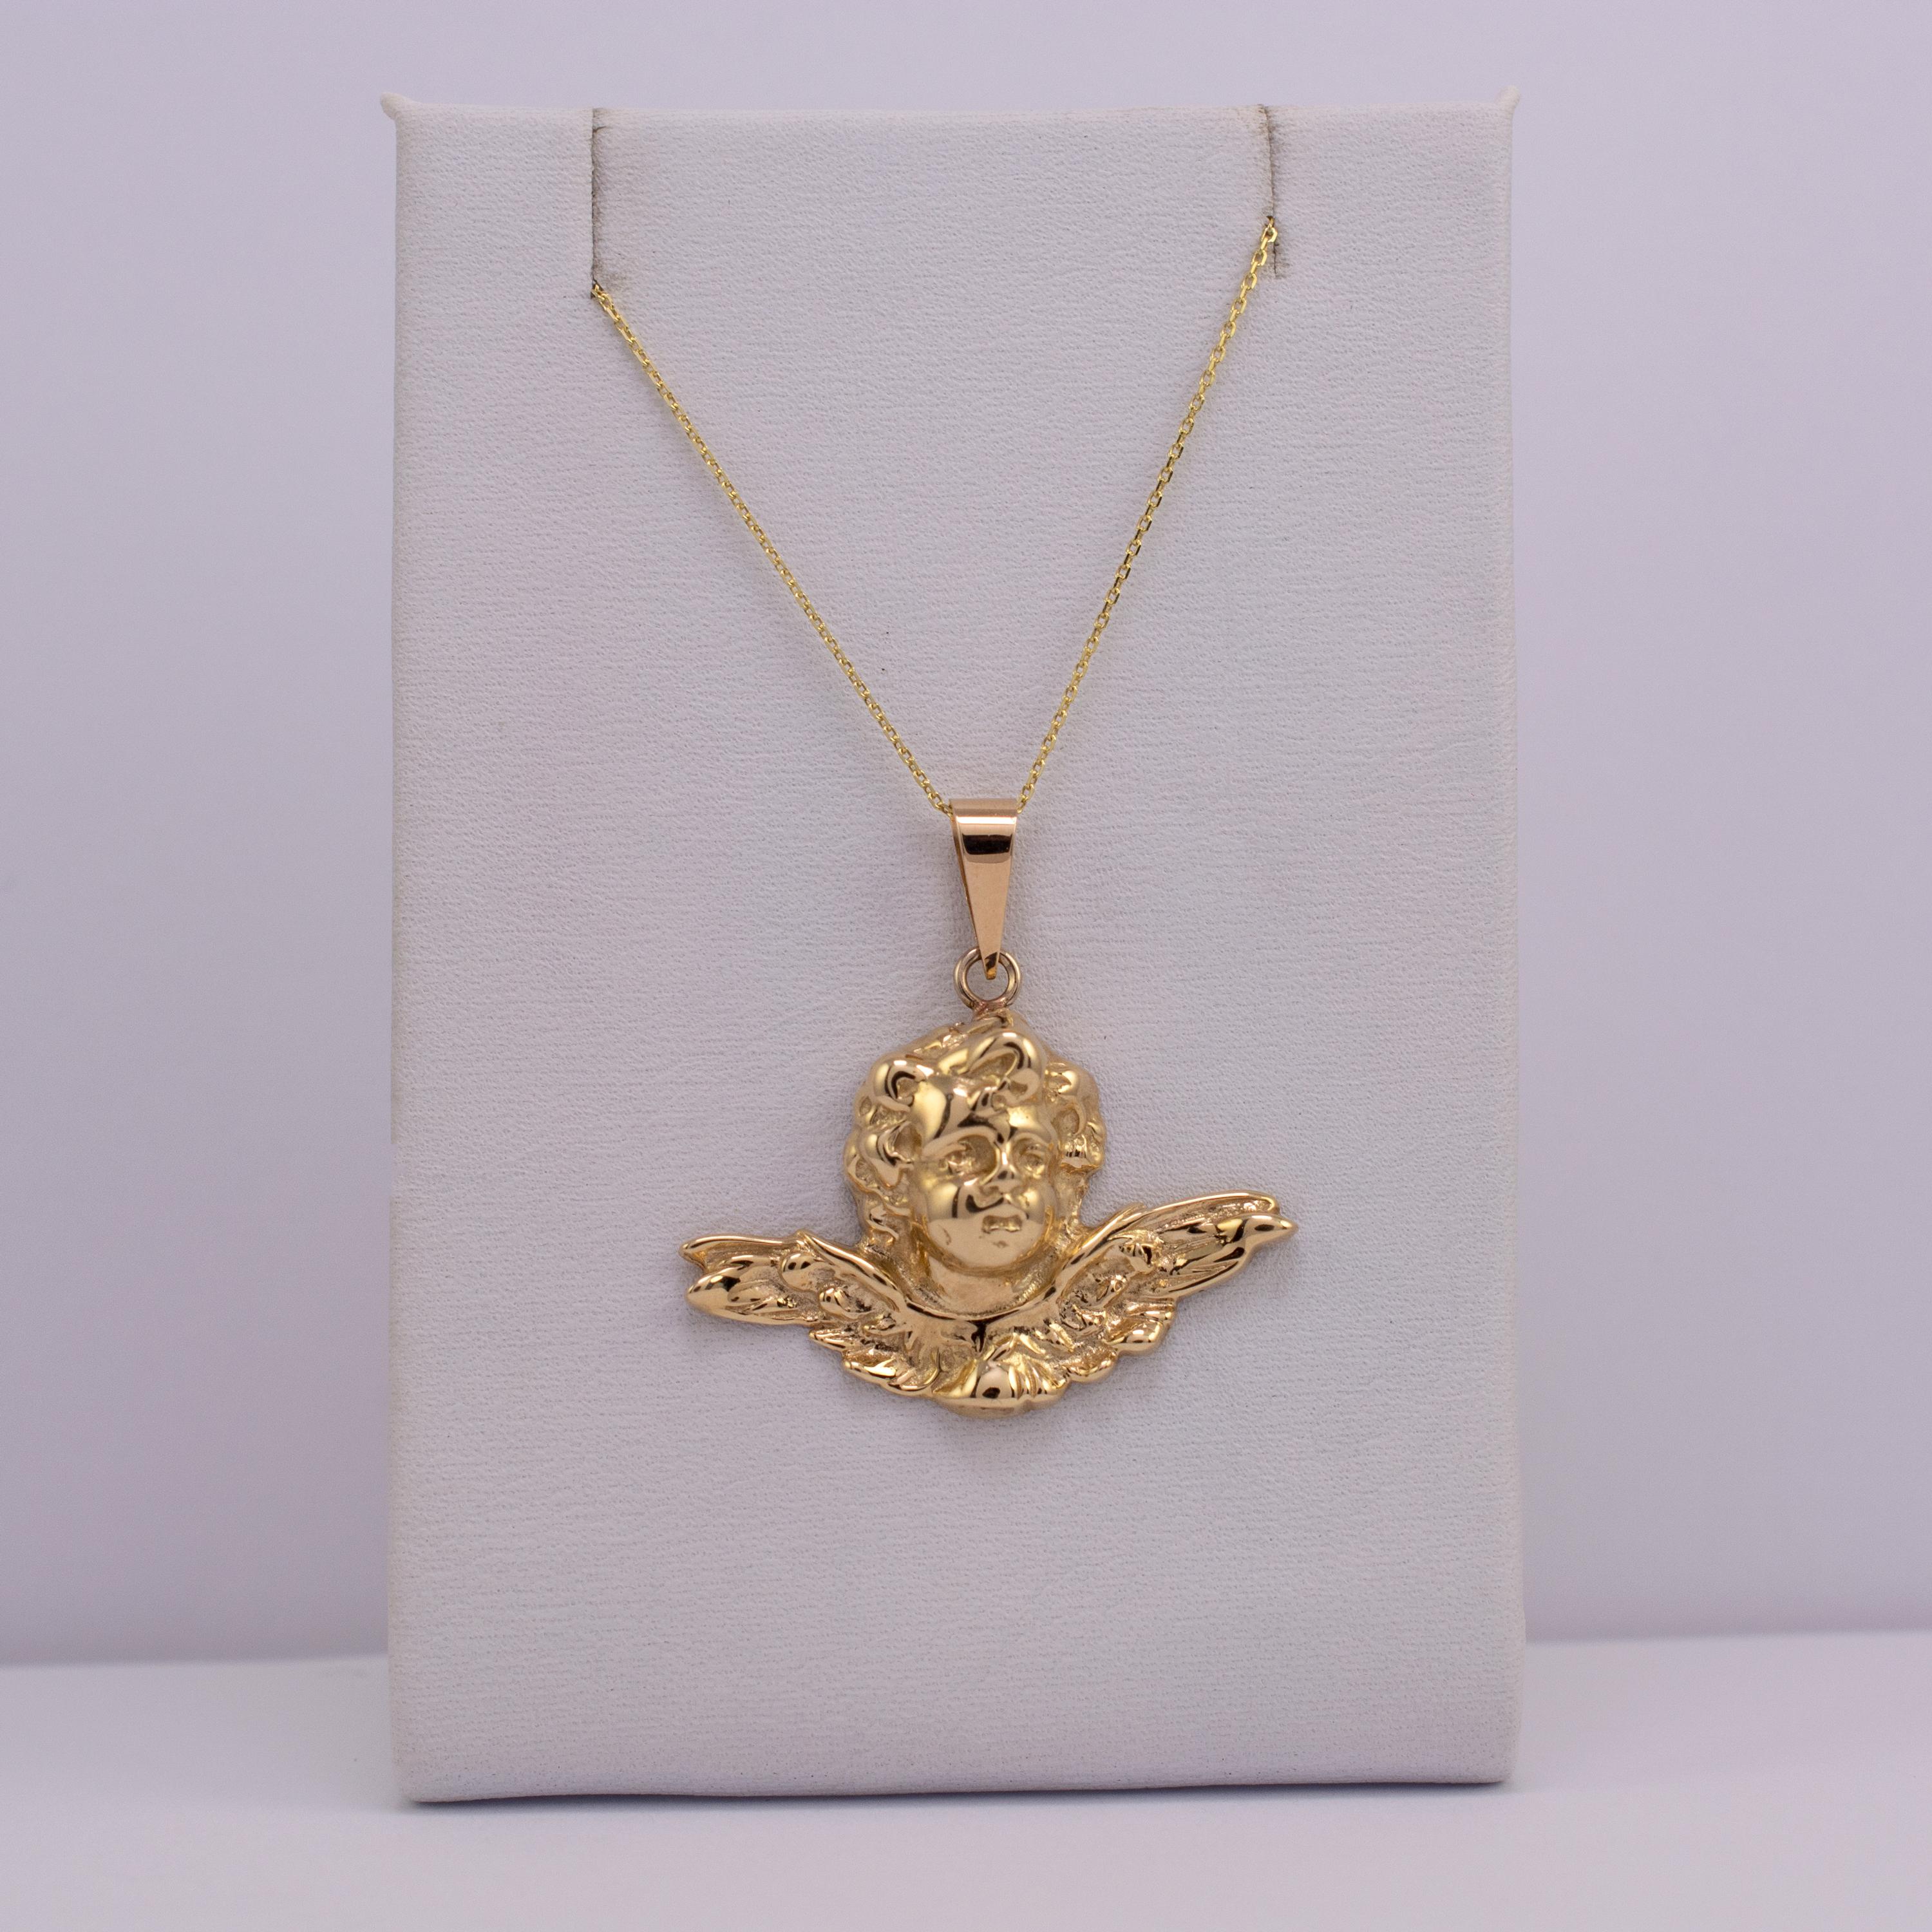 This graceful solid 9k gold winged Cherub pendant comes complete with 16-inch 9k gold chain.

The piece is superbly crafted, depicting winged cherub in smooth polished gold.

Full Birmingham assay hallmarks are engraved to the reverse side.

Offered